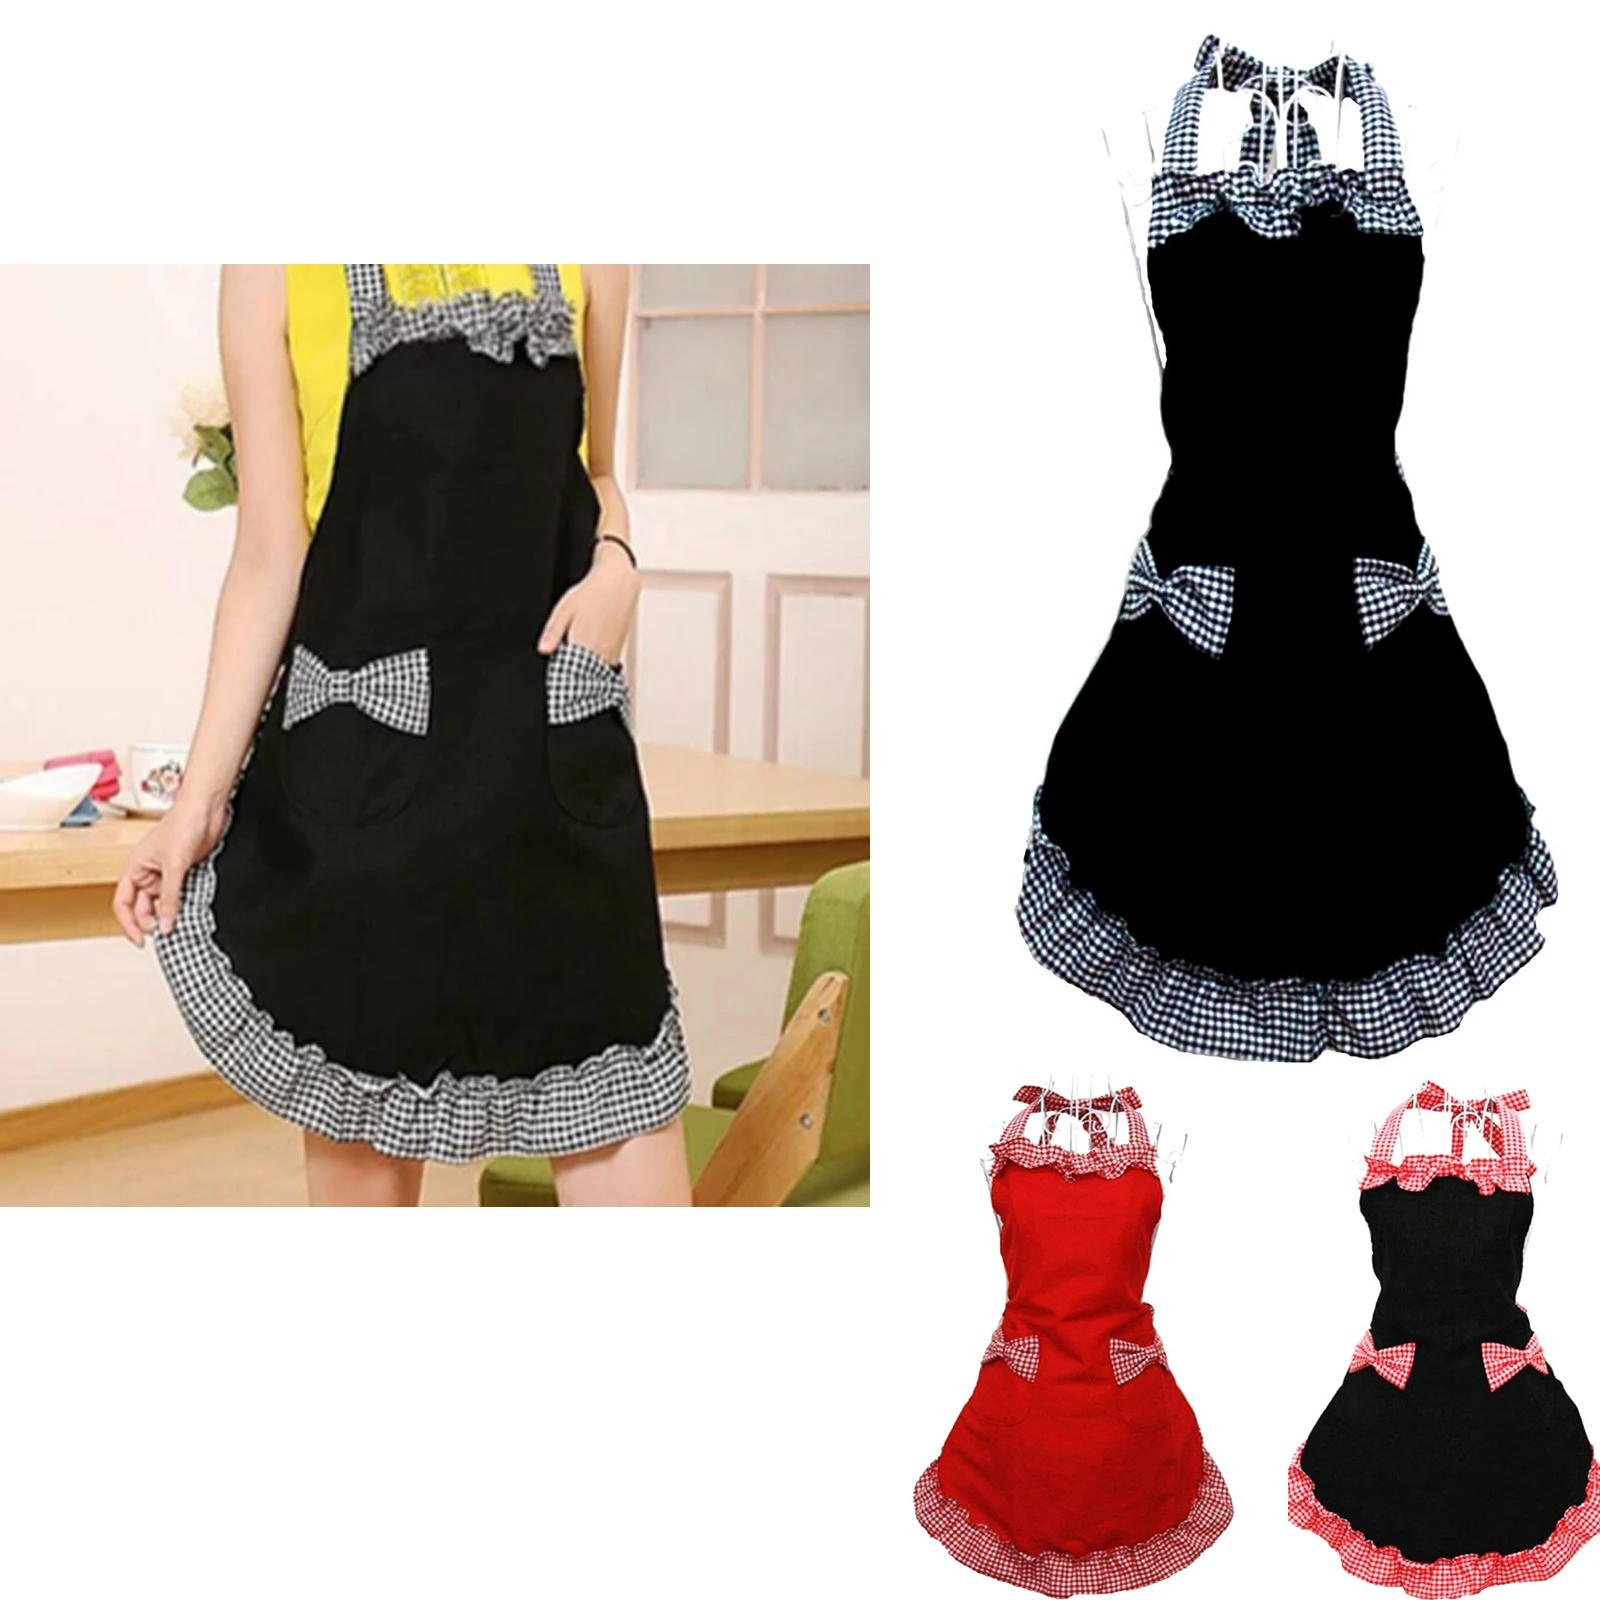 Bowknot Kitchen Apron 65x71cm Flirty Outfit Dress Sexy Women Girls Holiday Fashion Lace Apron With Pockets Valentines Gifts